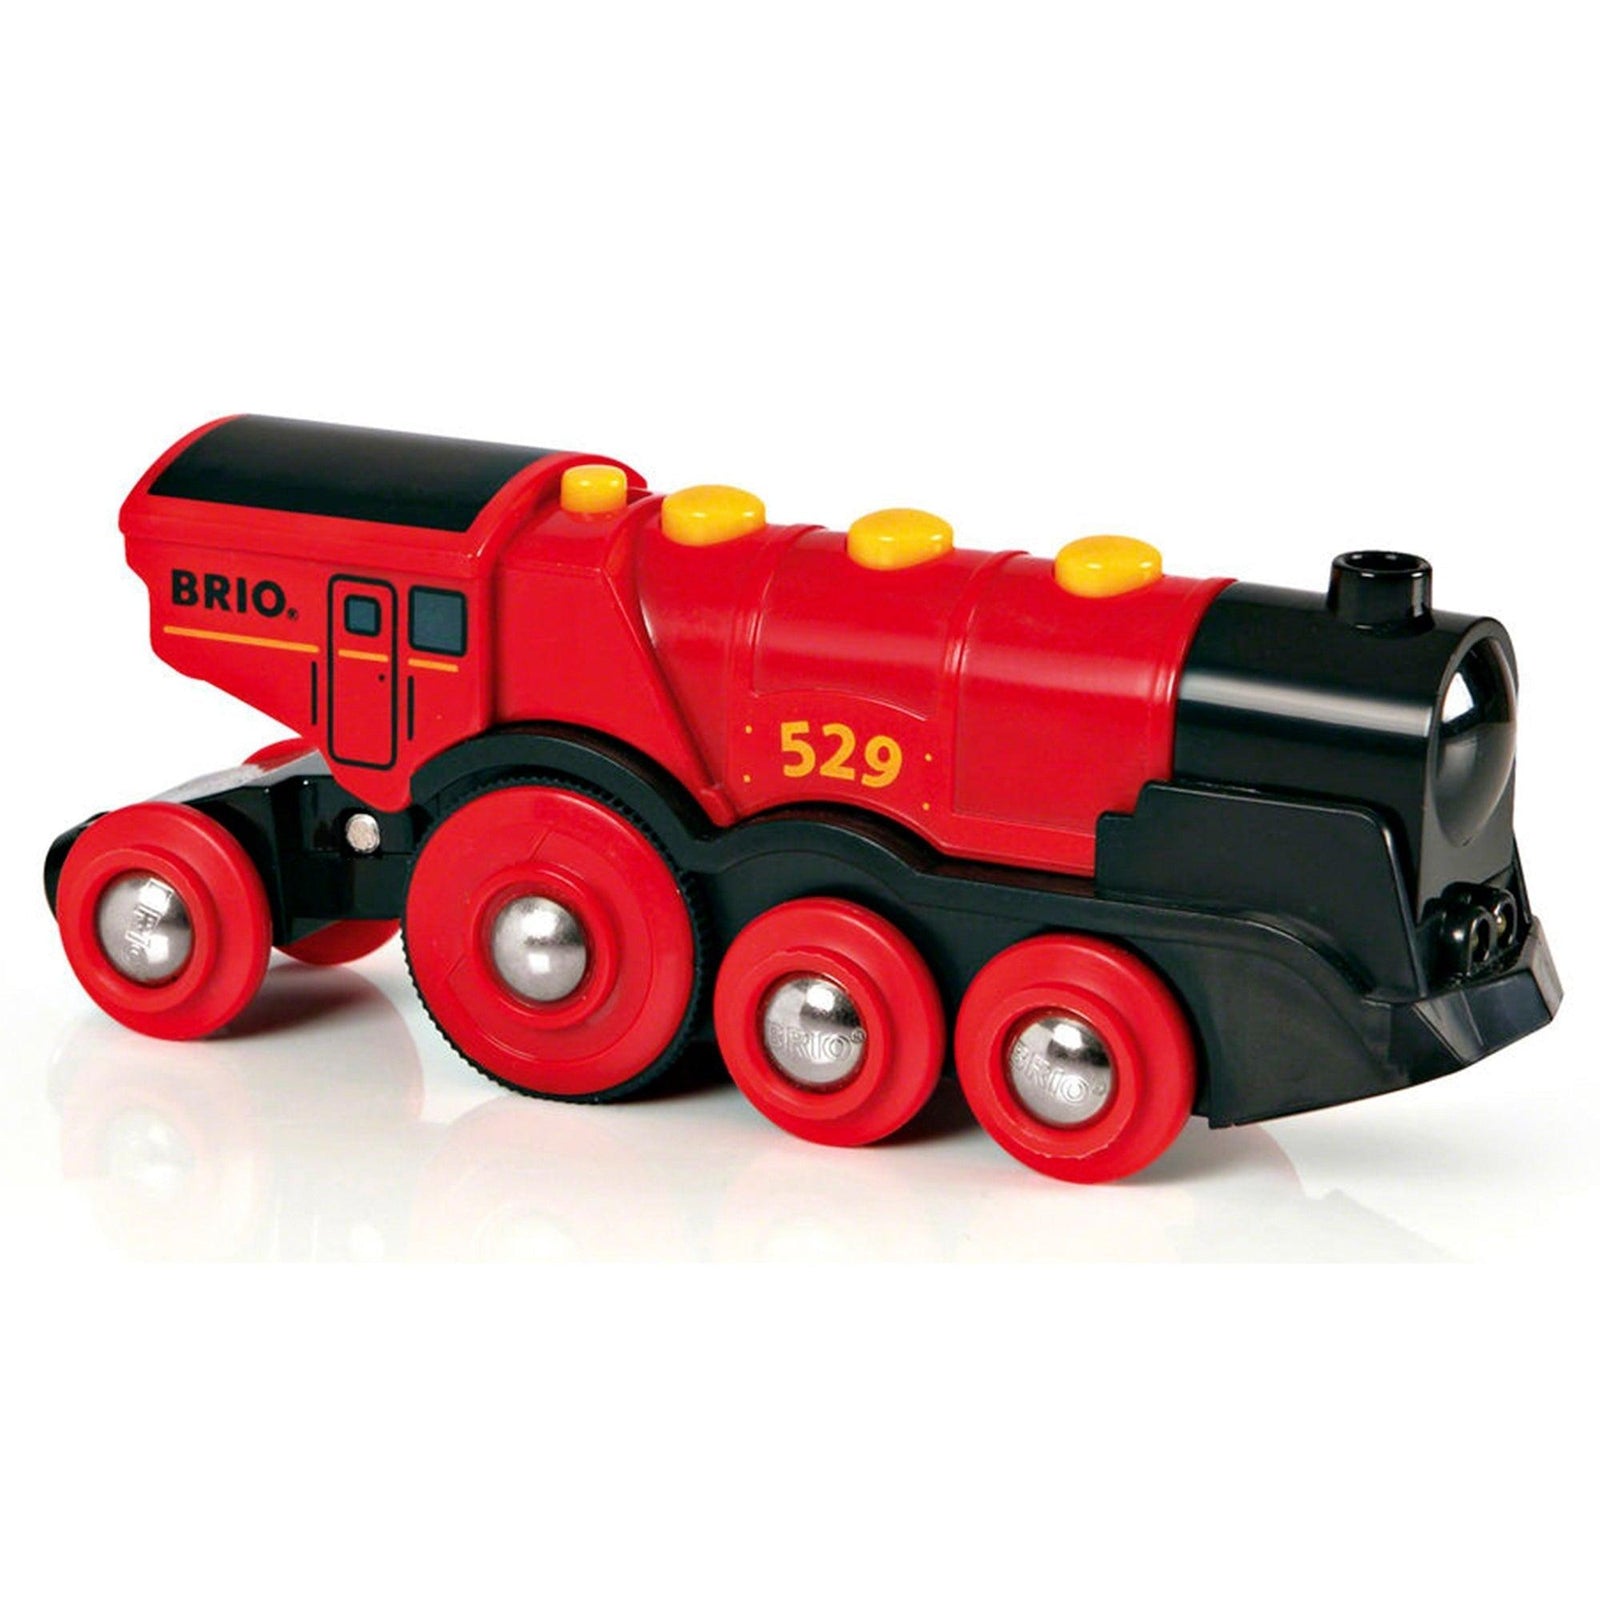 BRIO: red battery locomotive Mighty Red Action Locomotive World